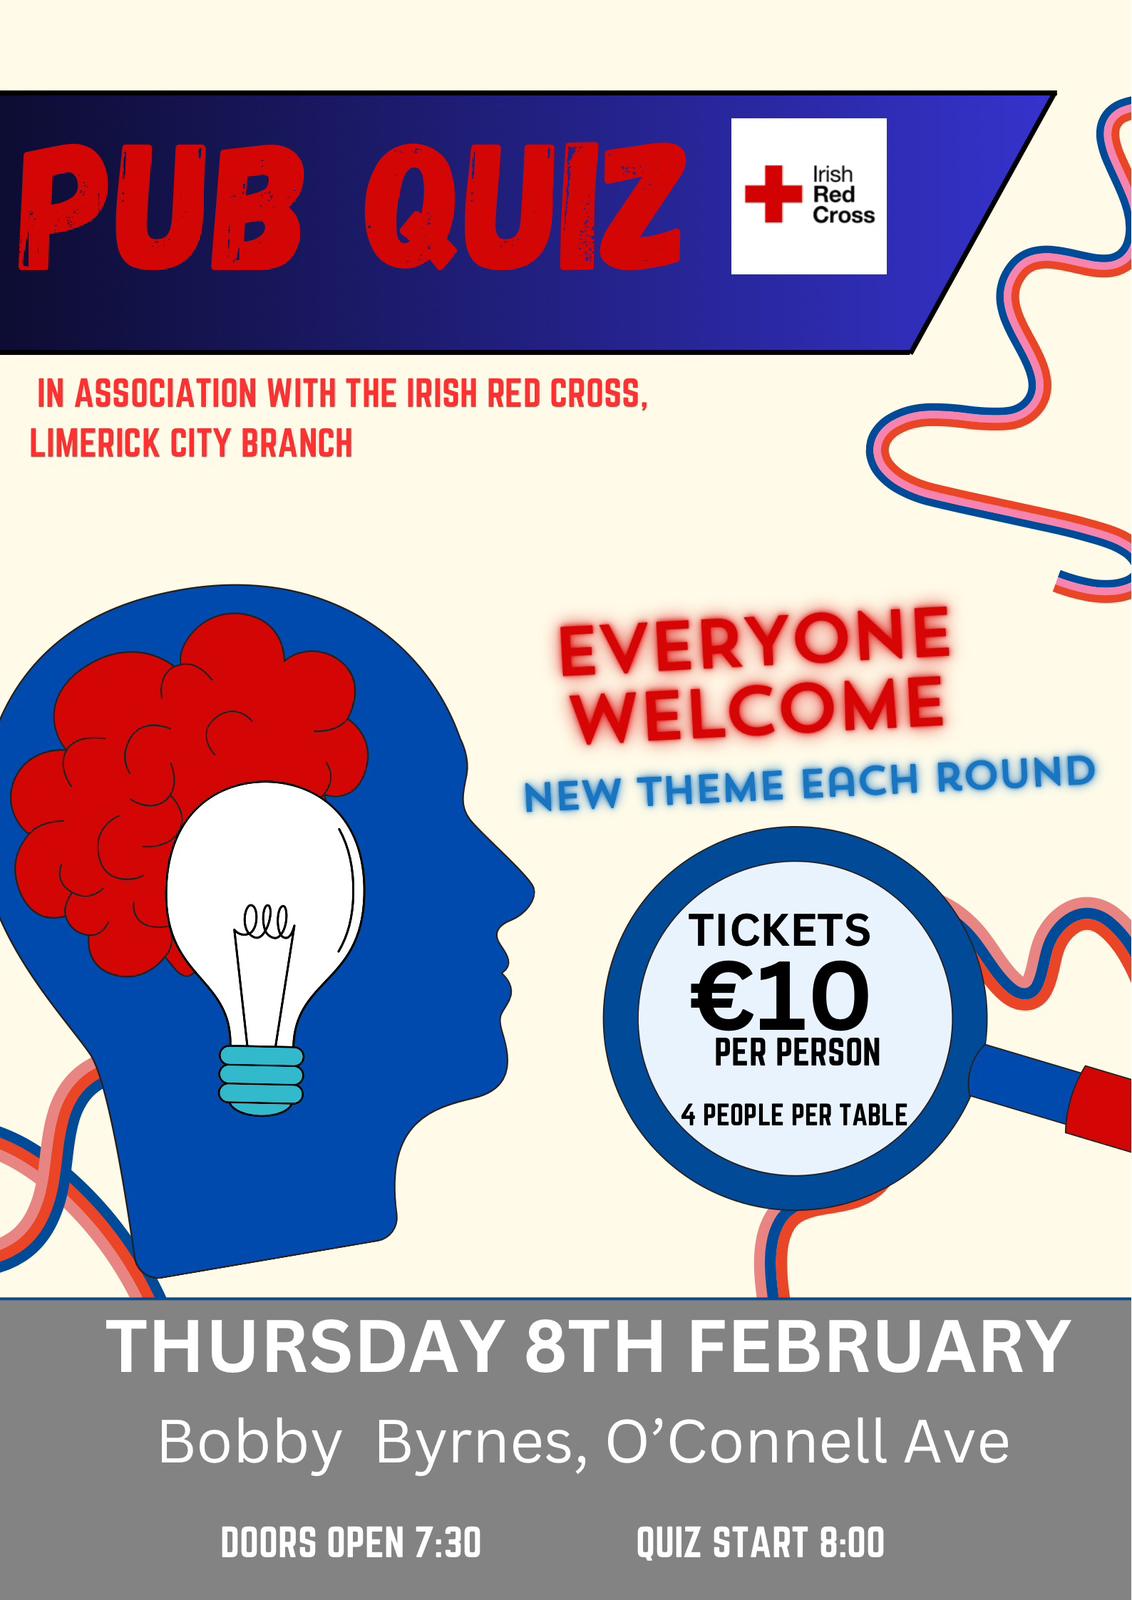 Pub Quiz in aid of the Limerick Red Cross – City Branch.